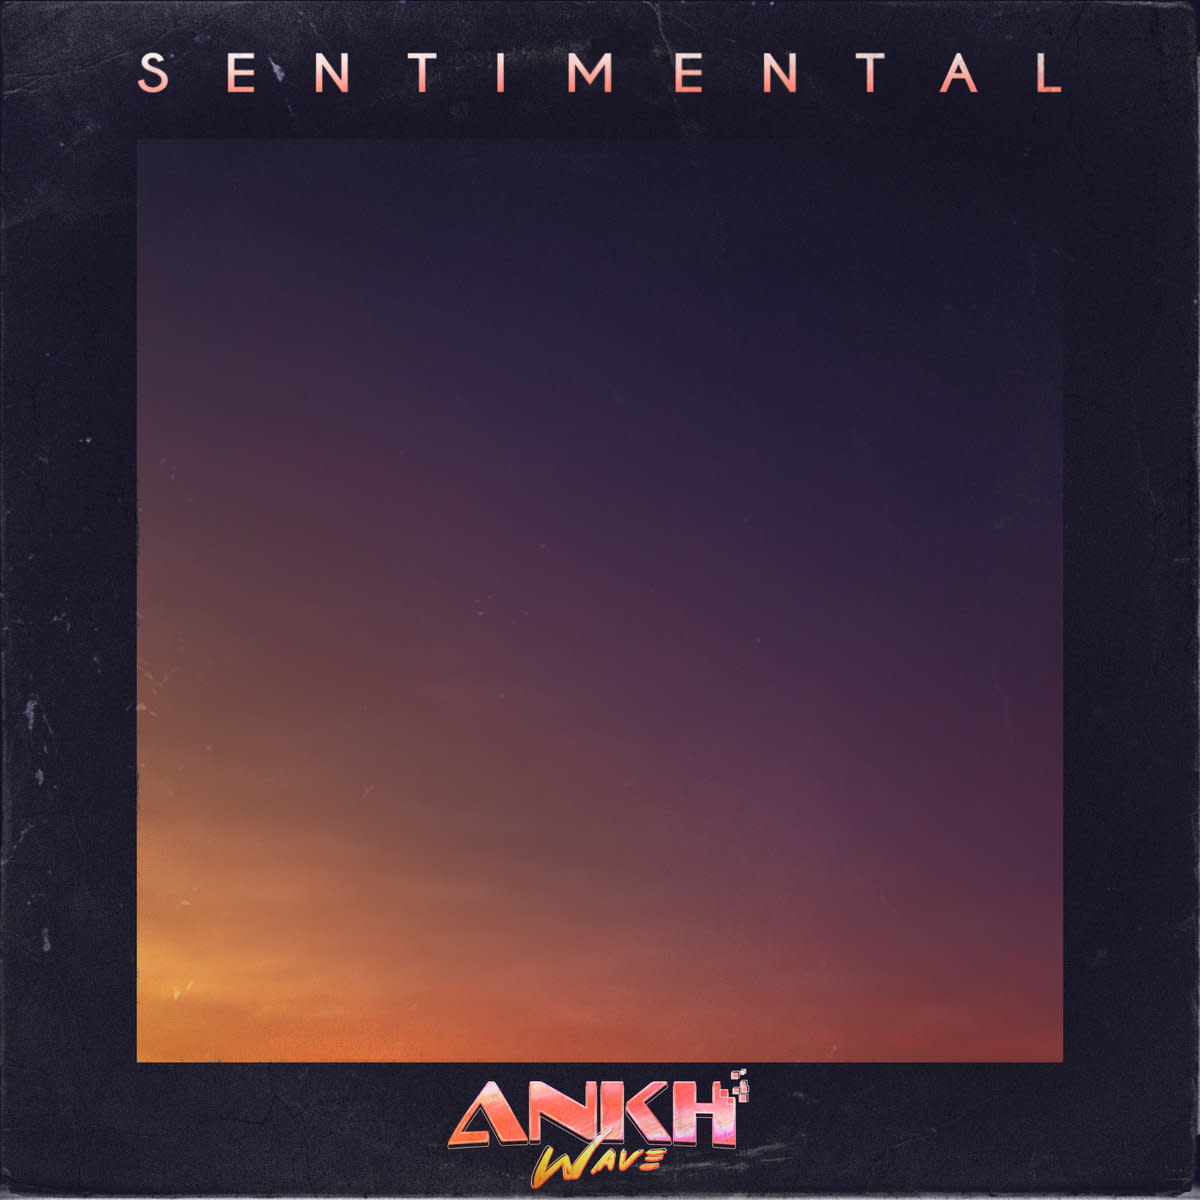 synth-single-review-sentimental-by-ankh-wave